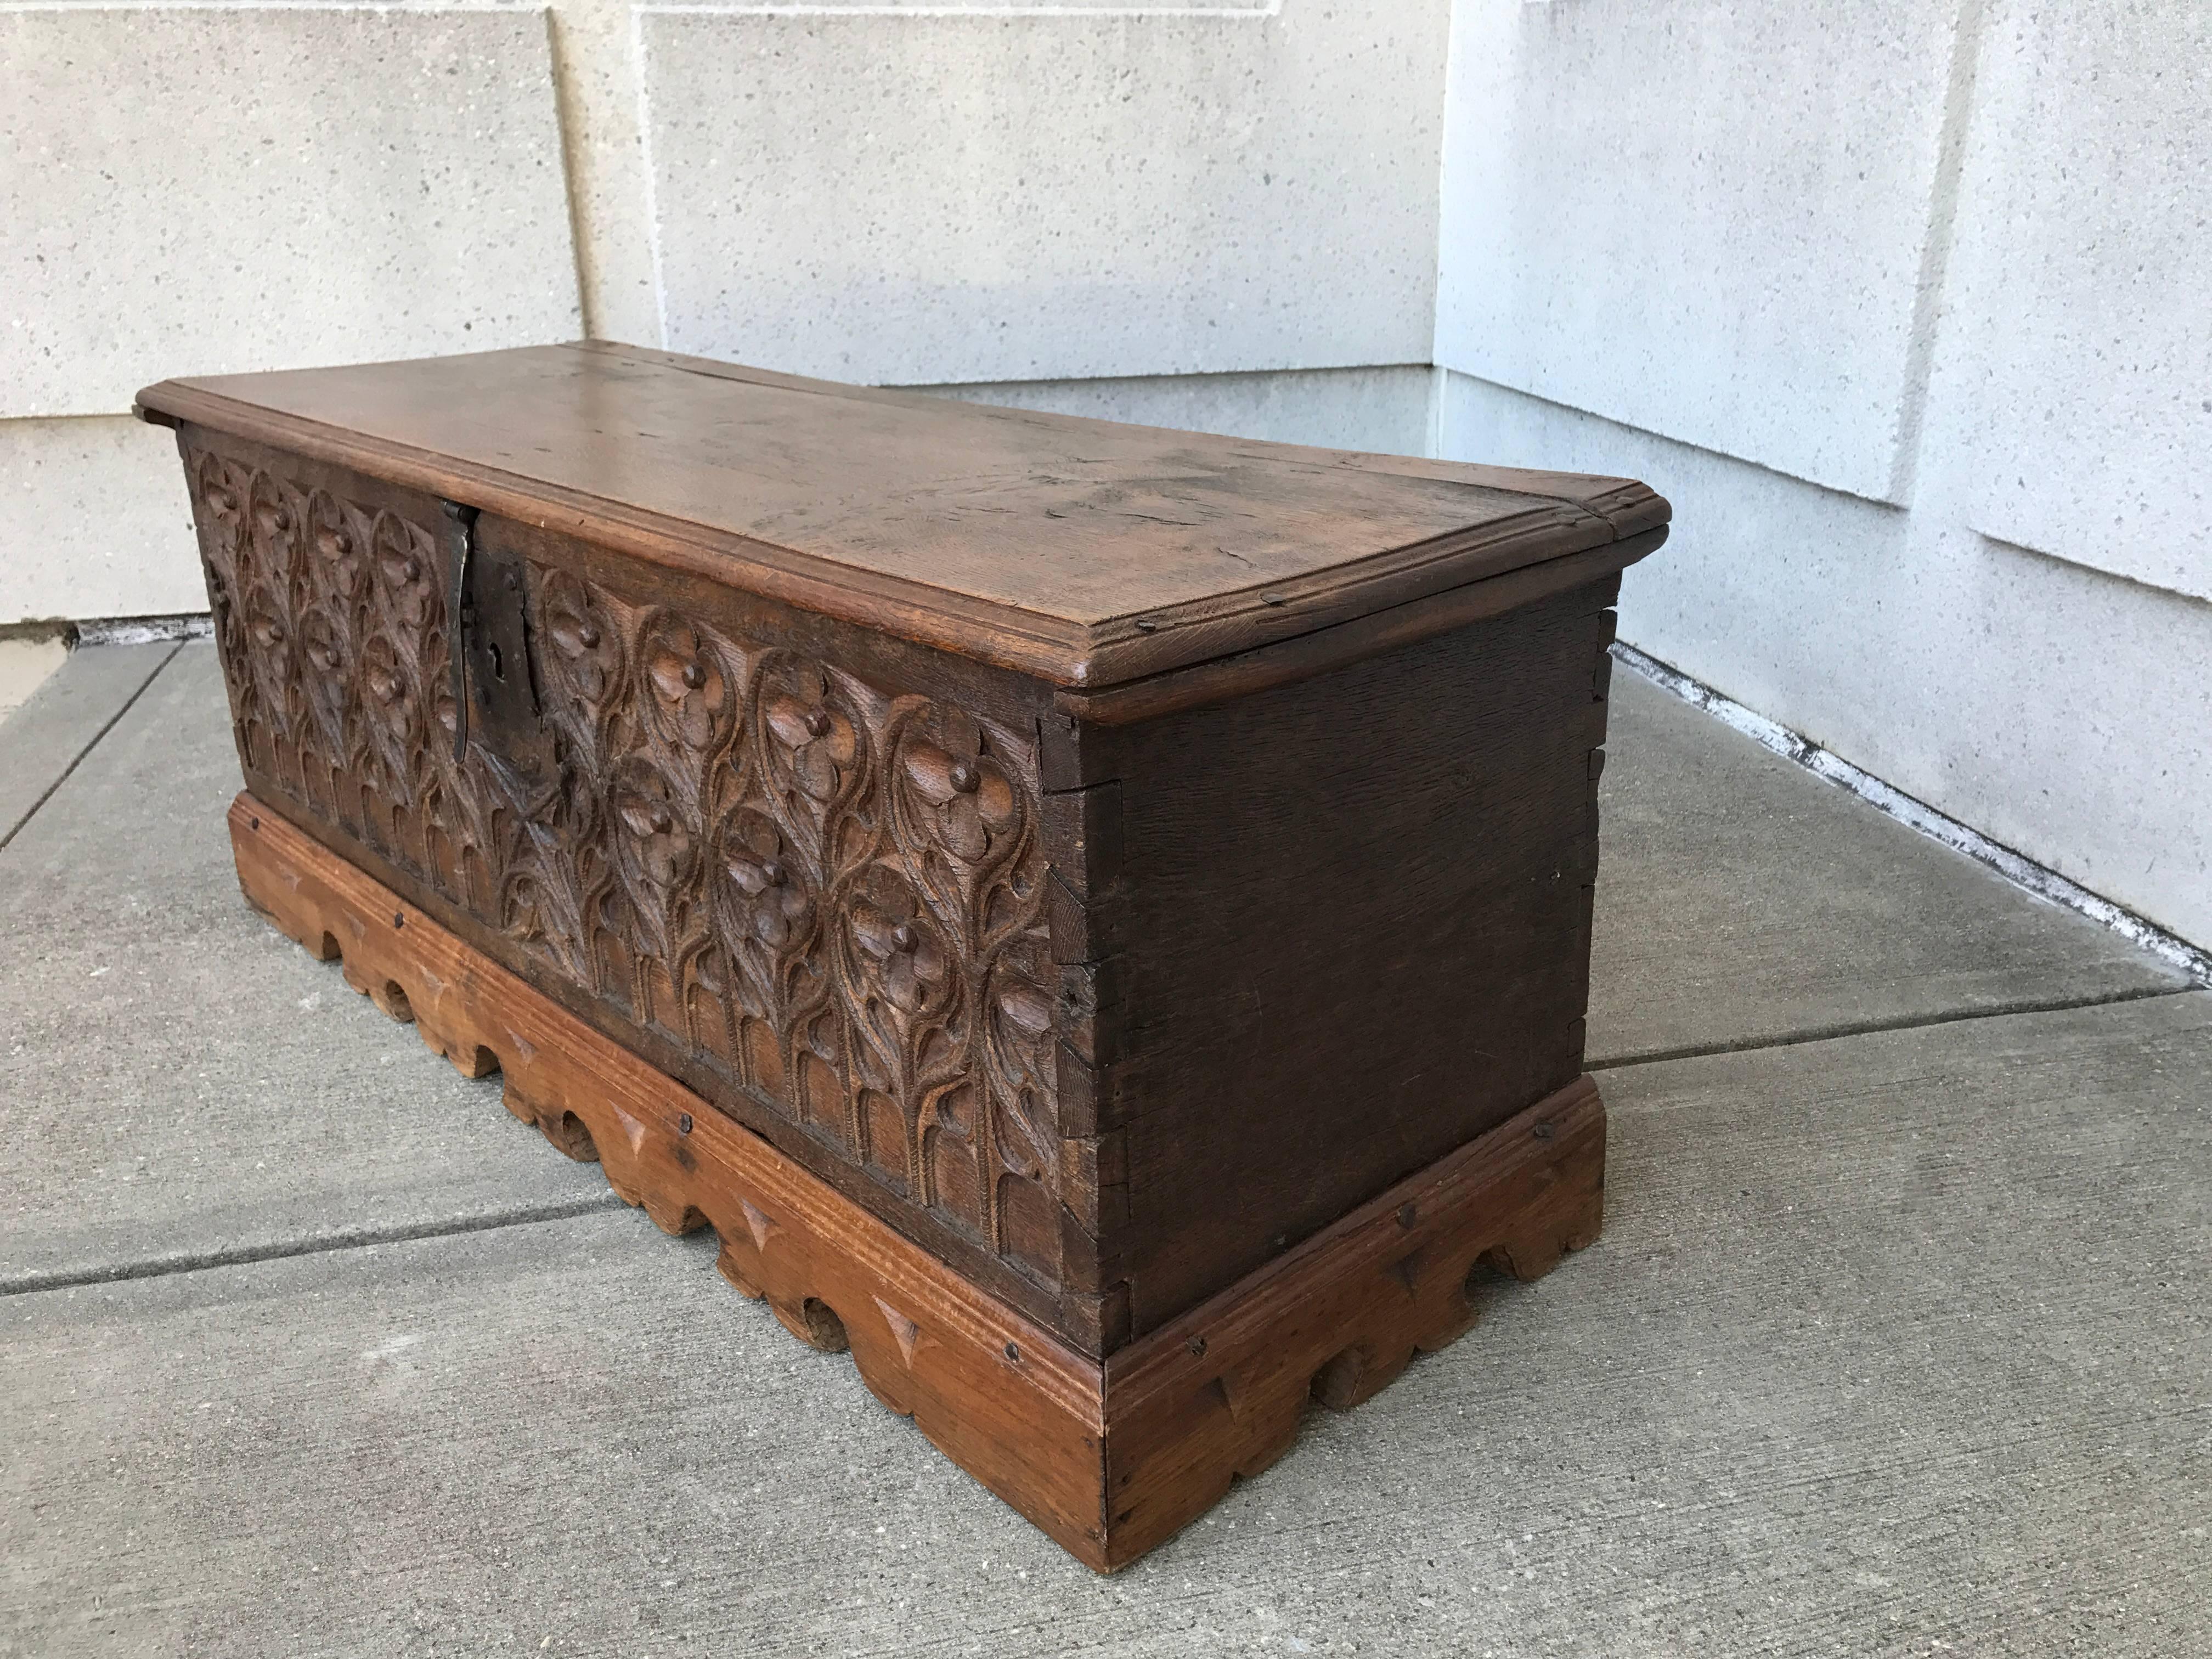 A French oak lift top blanket chest, coffer, cassone with sophisticated carved Gothic tracery front. The body of the chest 16th century. The beautifully carved plinth likely of a later date, 17th or 18th century. Rich honey patina.